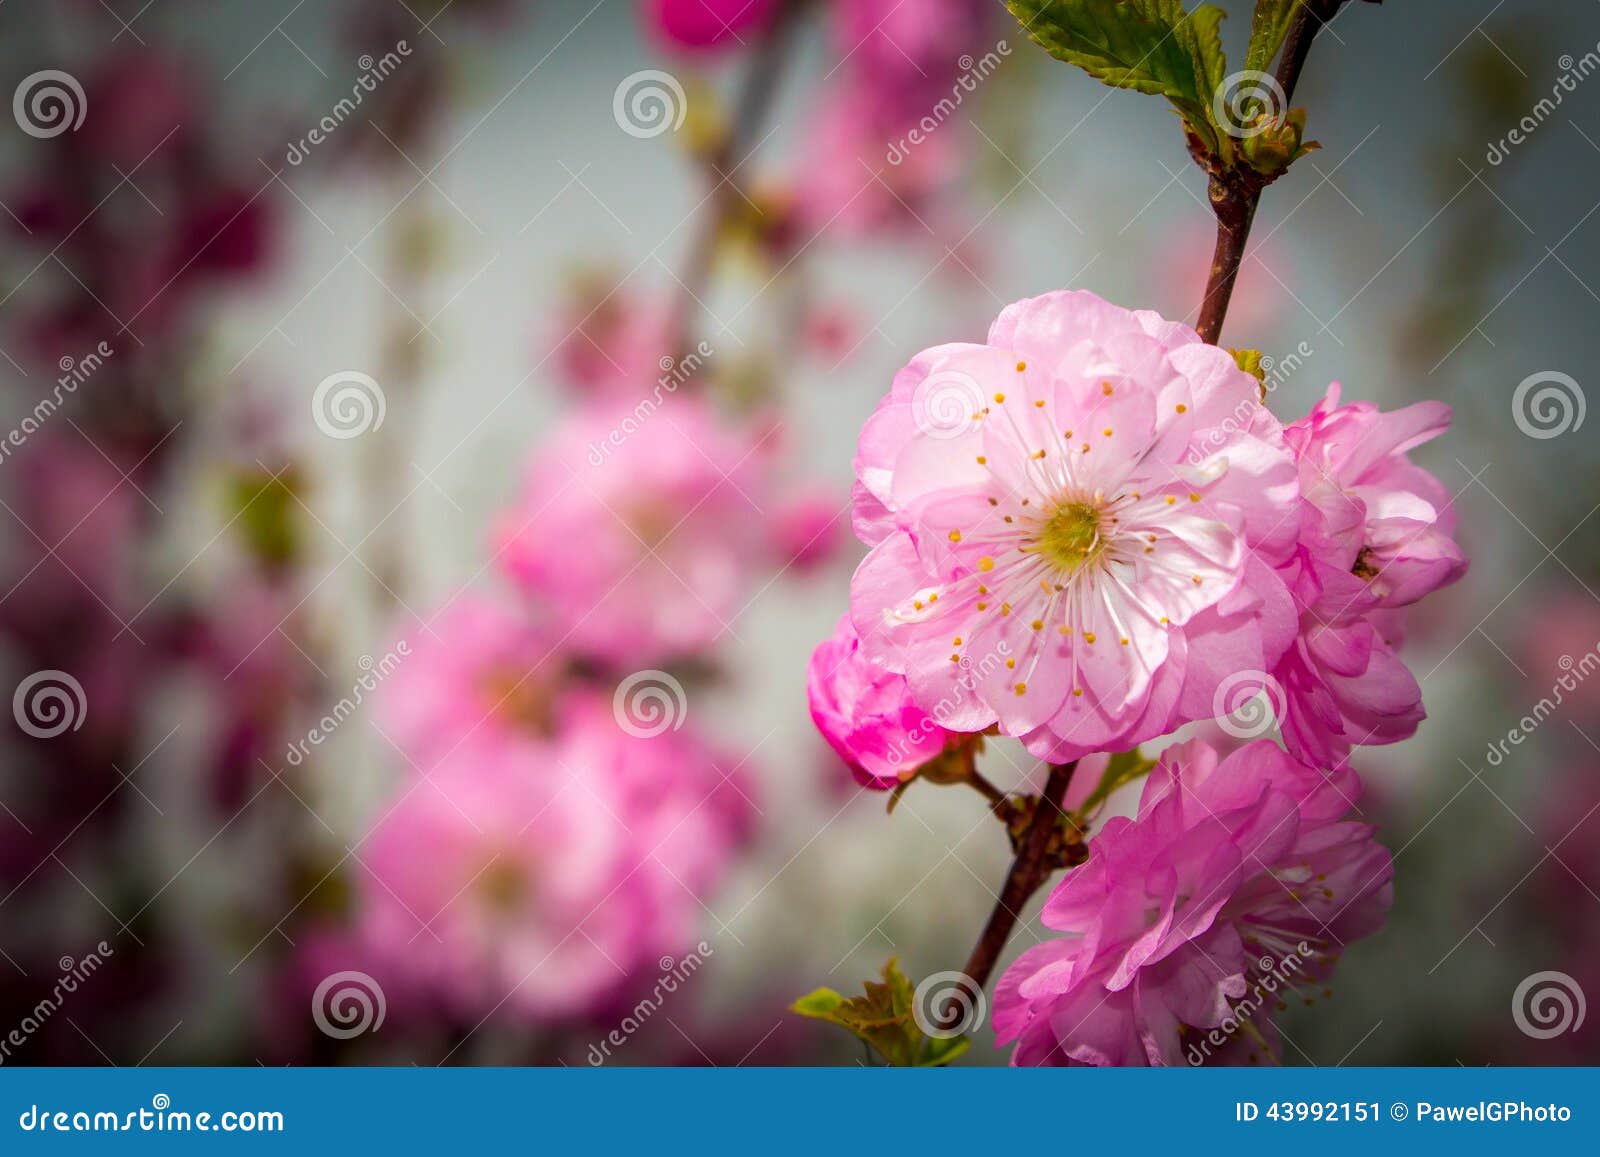 Fresh Almond Blossom in the Spring Stock Image - Image of summer ...